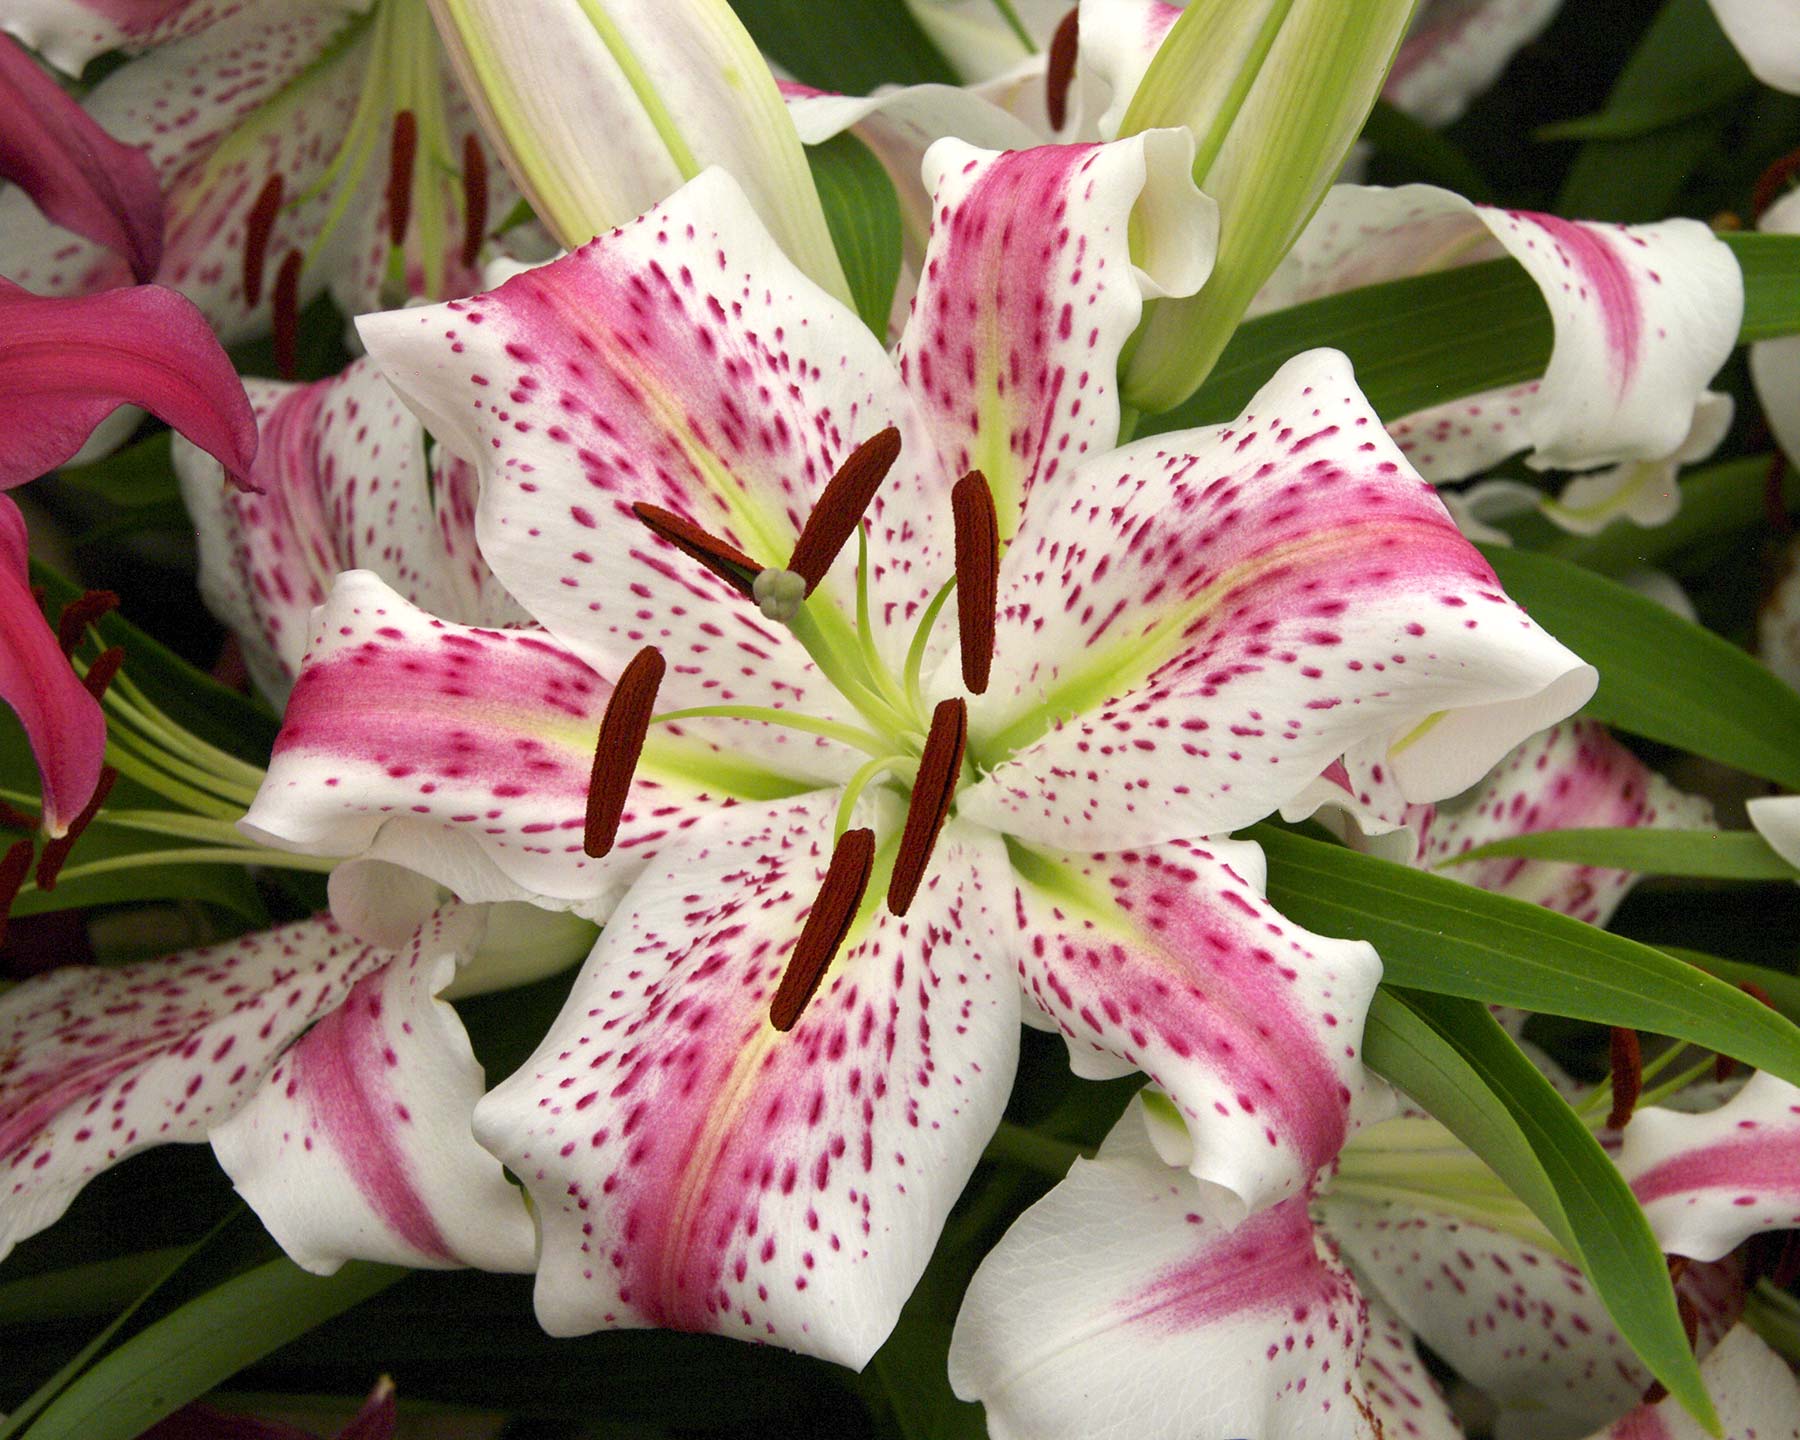 Lilium Oriental Hybrids - Spectator - White flower with pink central band and magenta spots